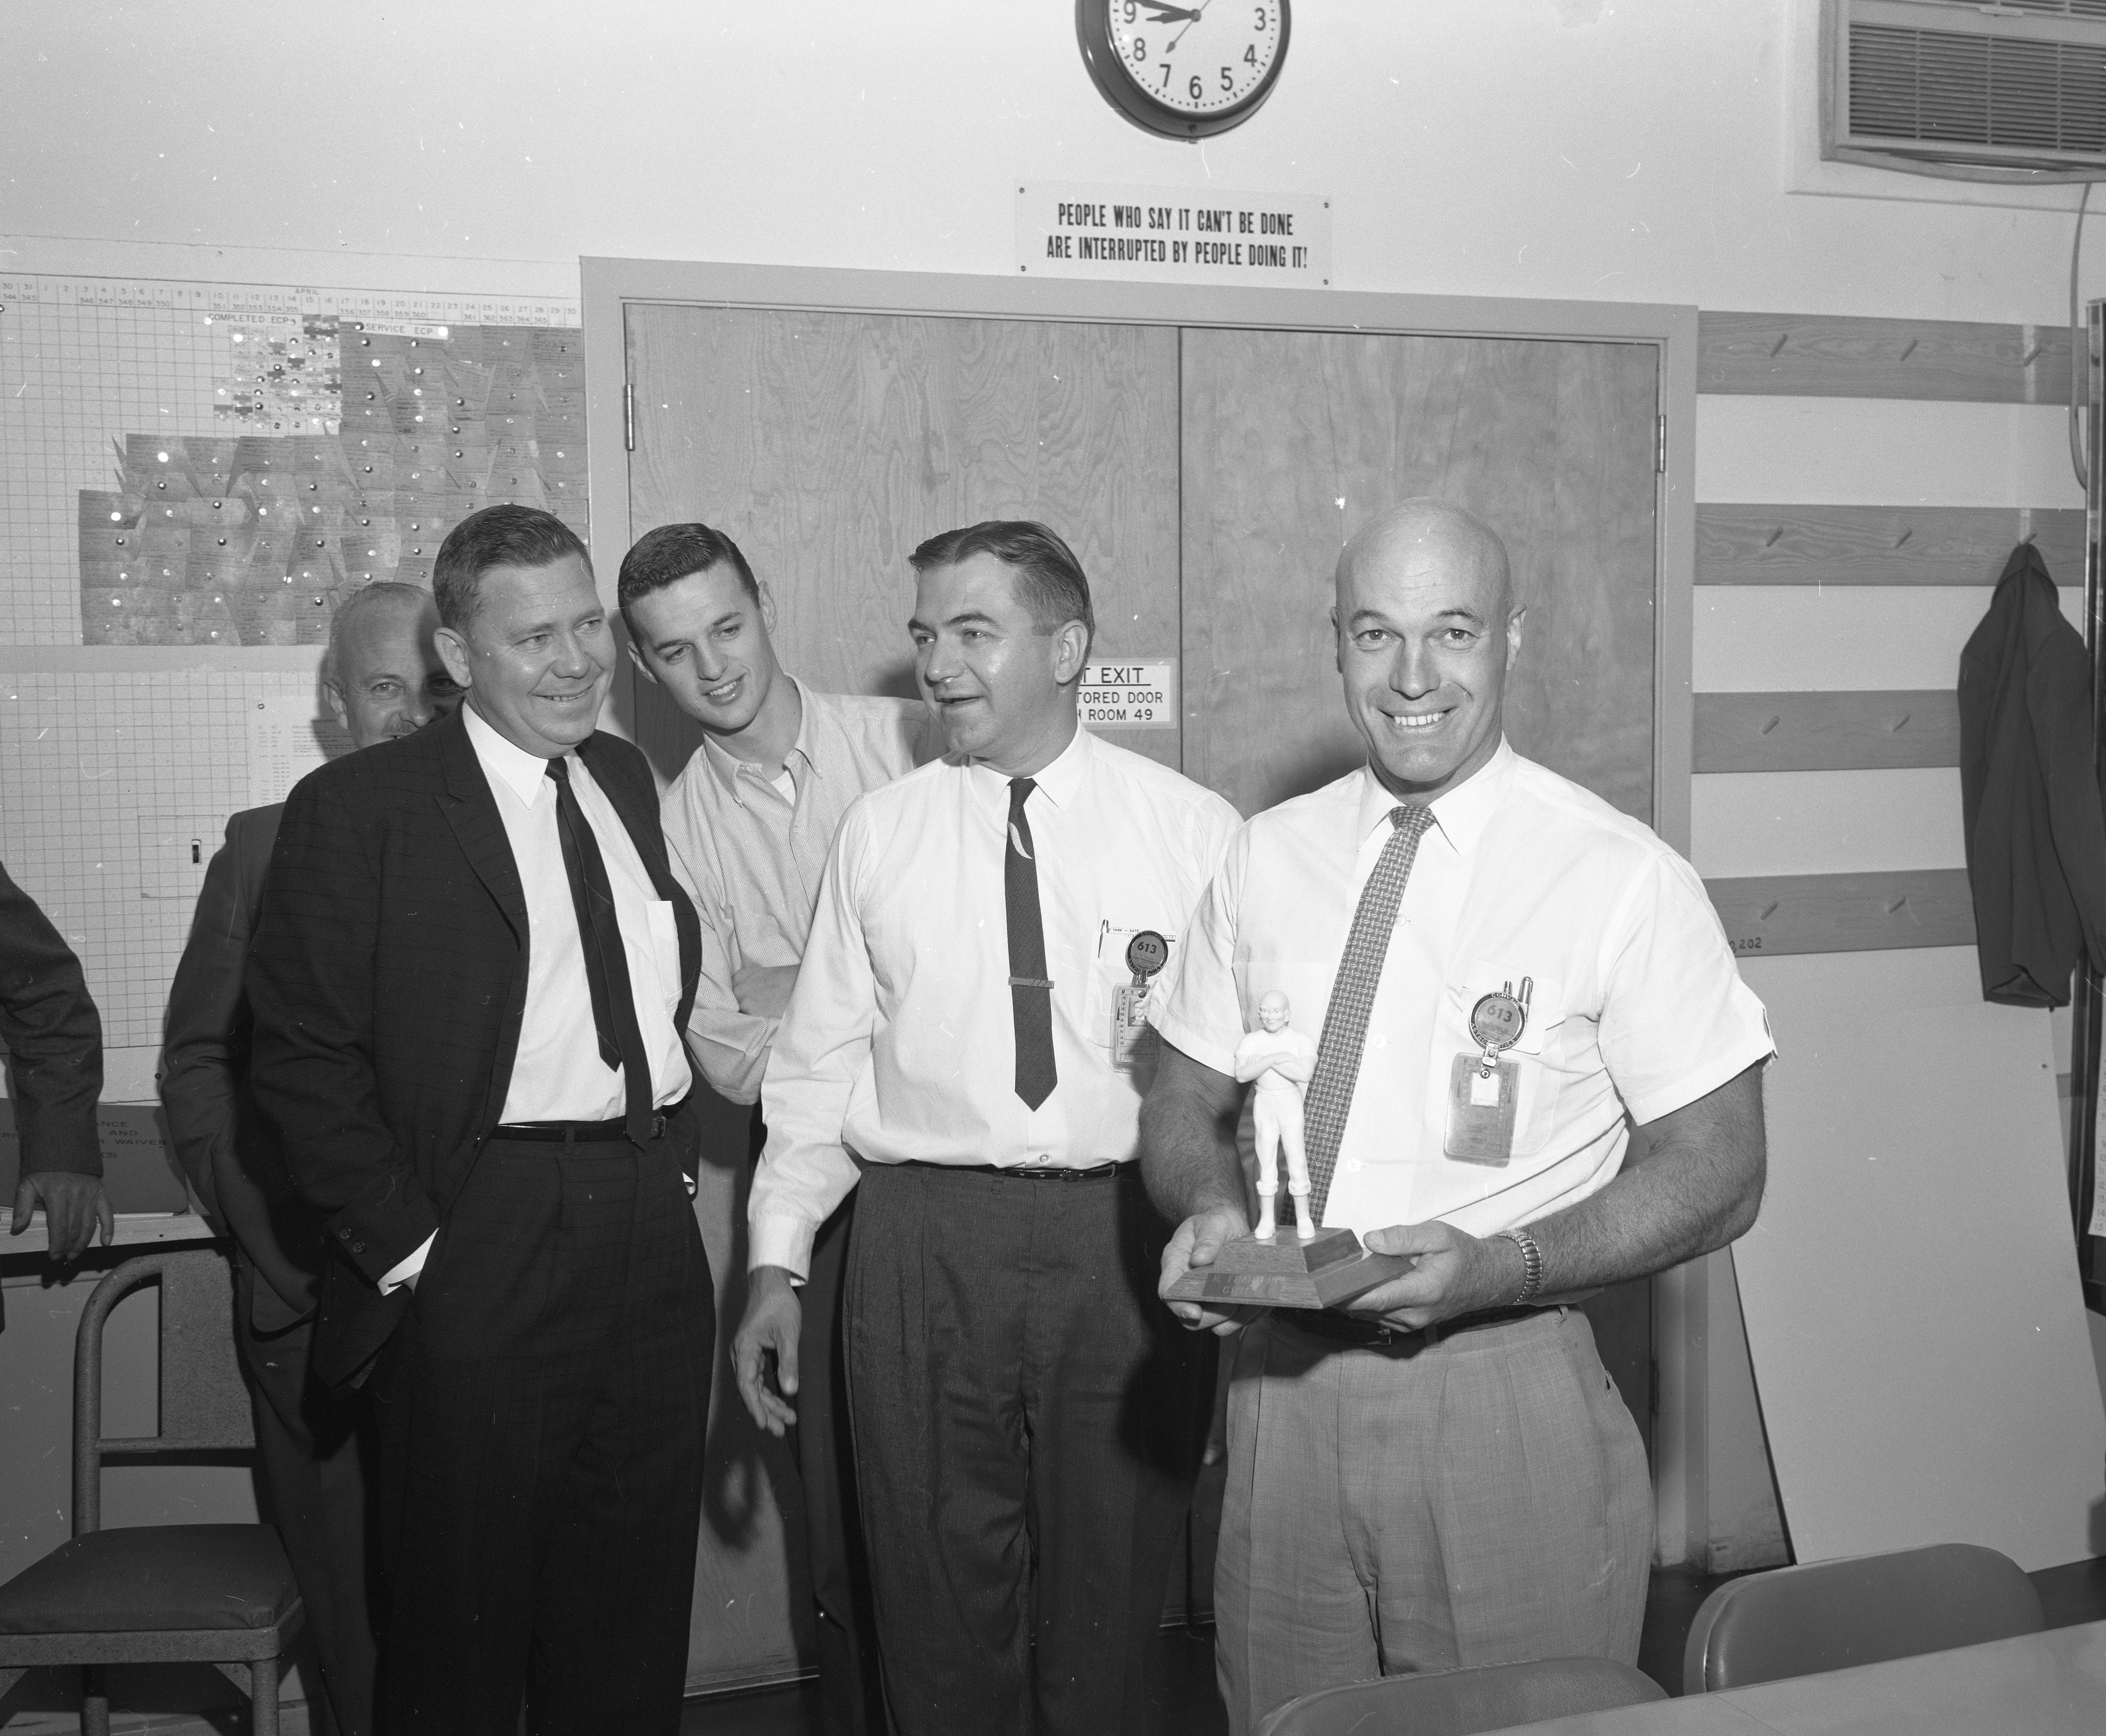 J. May and William F. Chana watching R. Franklin receive the Mr. Clean trophy on August 14th, 1961. 